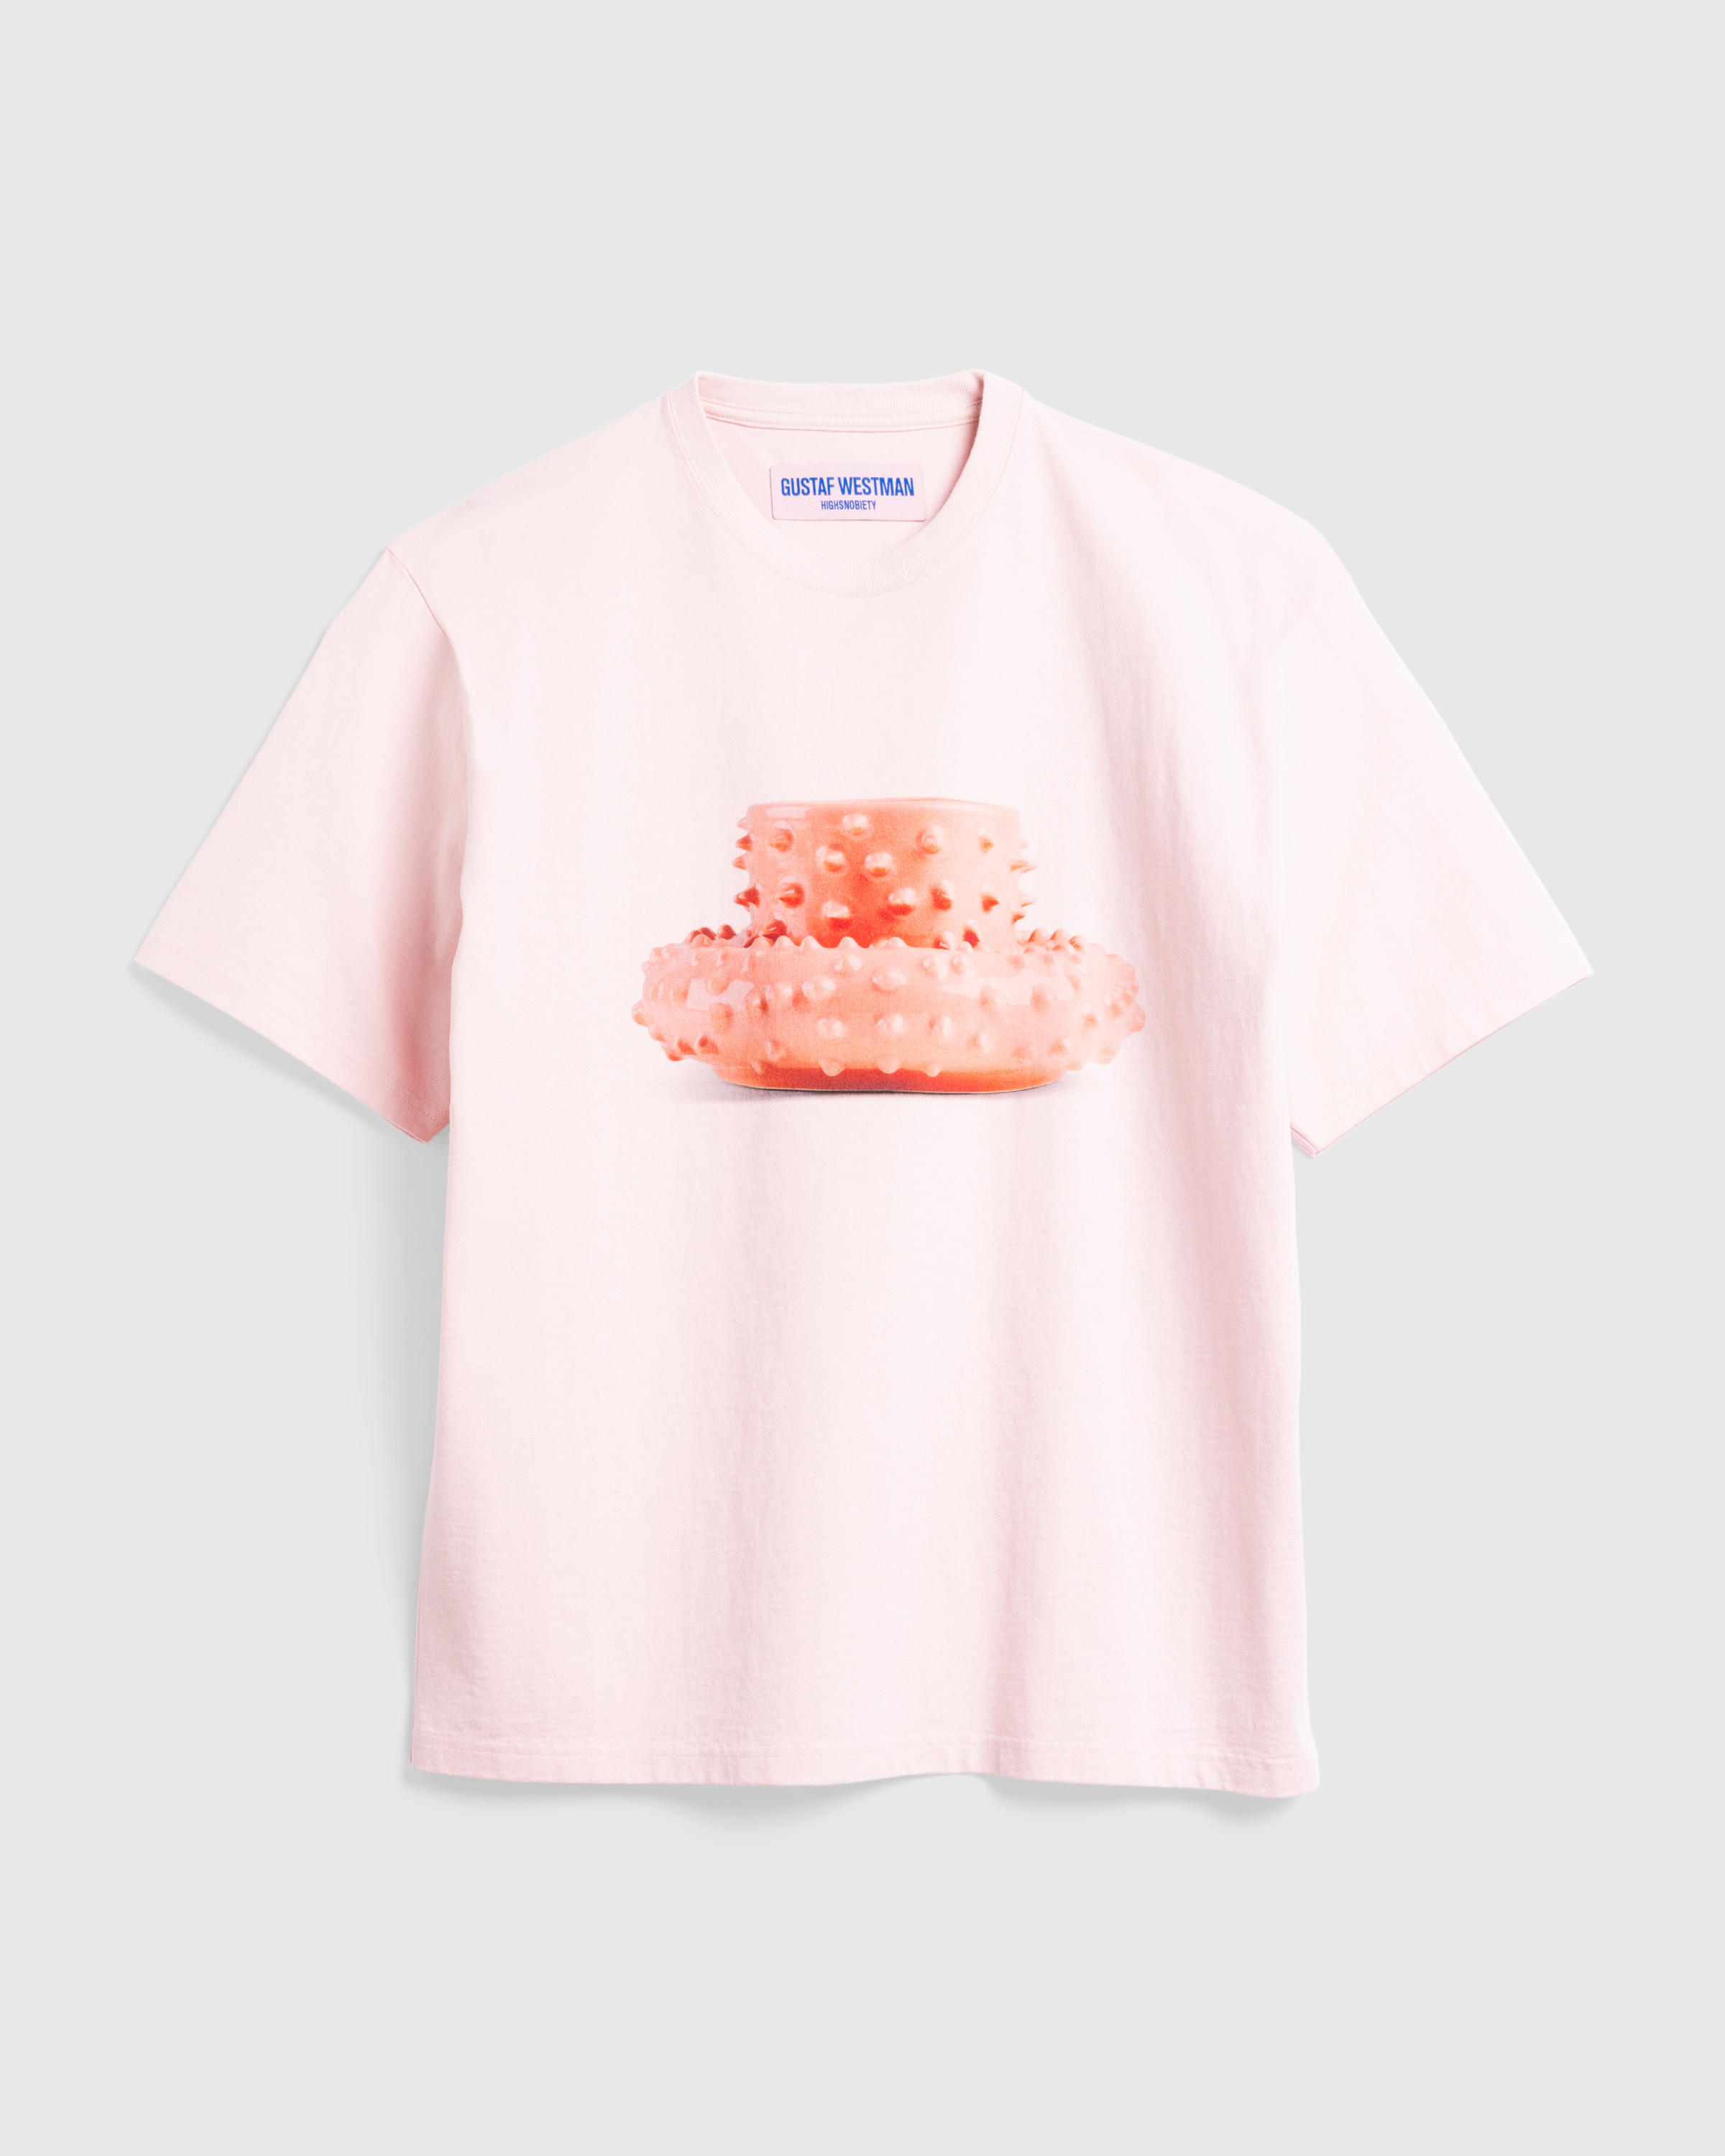 Highsnobiety x Gustaf Westman – Spiky Cup and Saucer T-Shirt Pink  - T-Shirts - Pink - Image 1